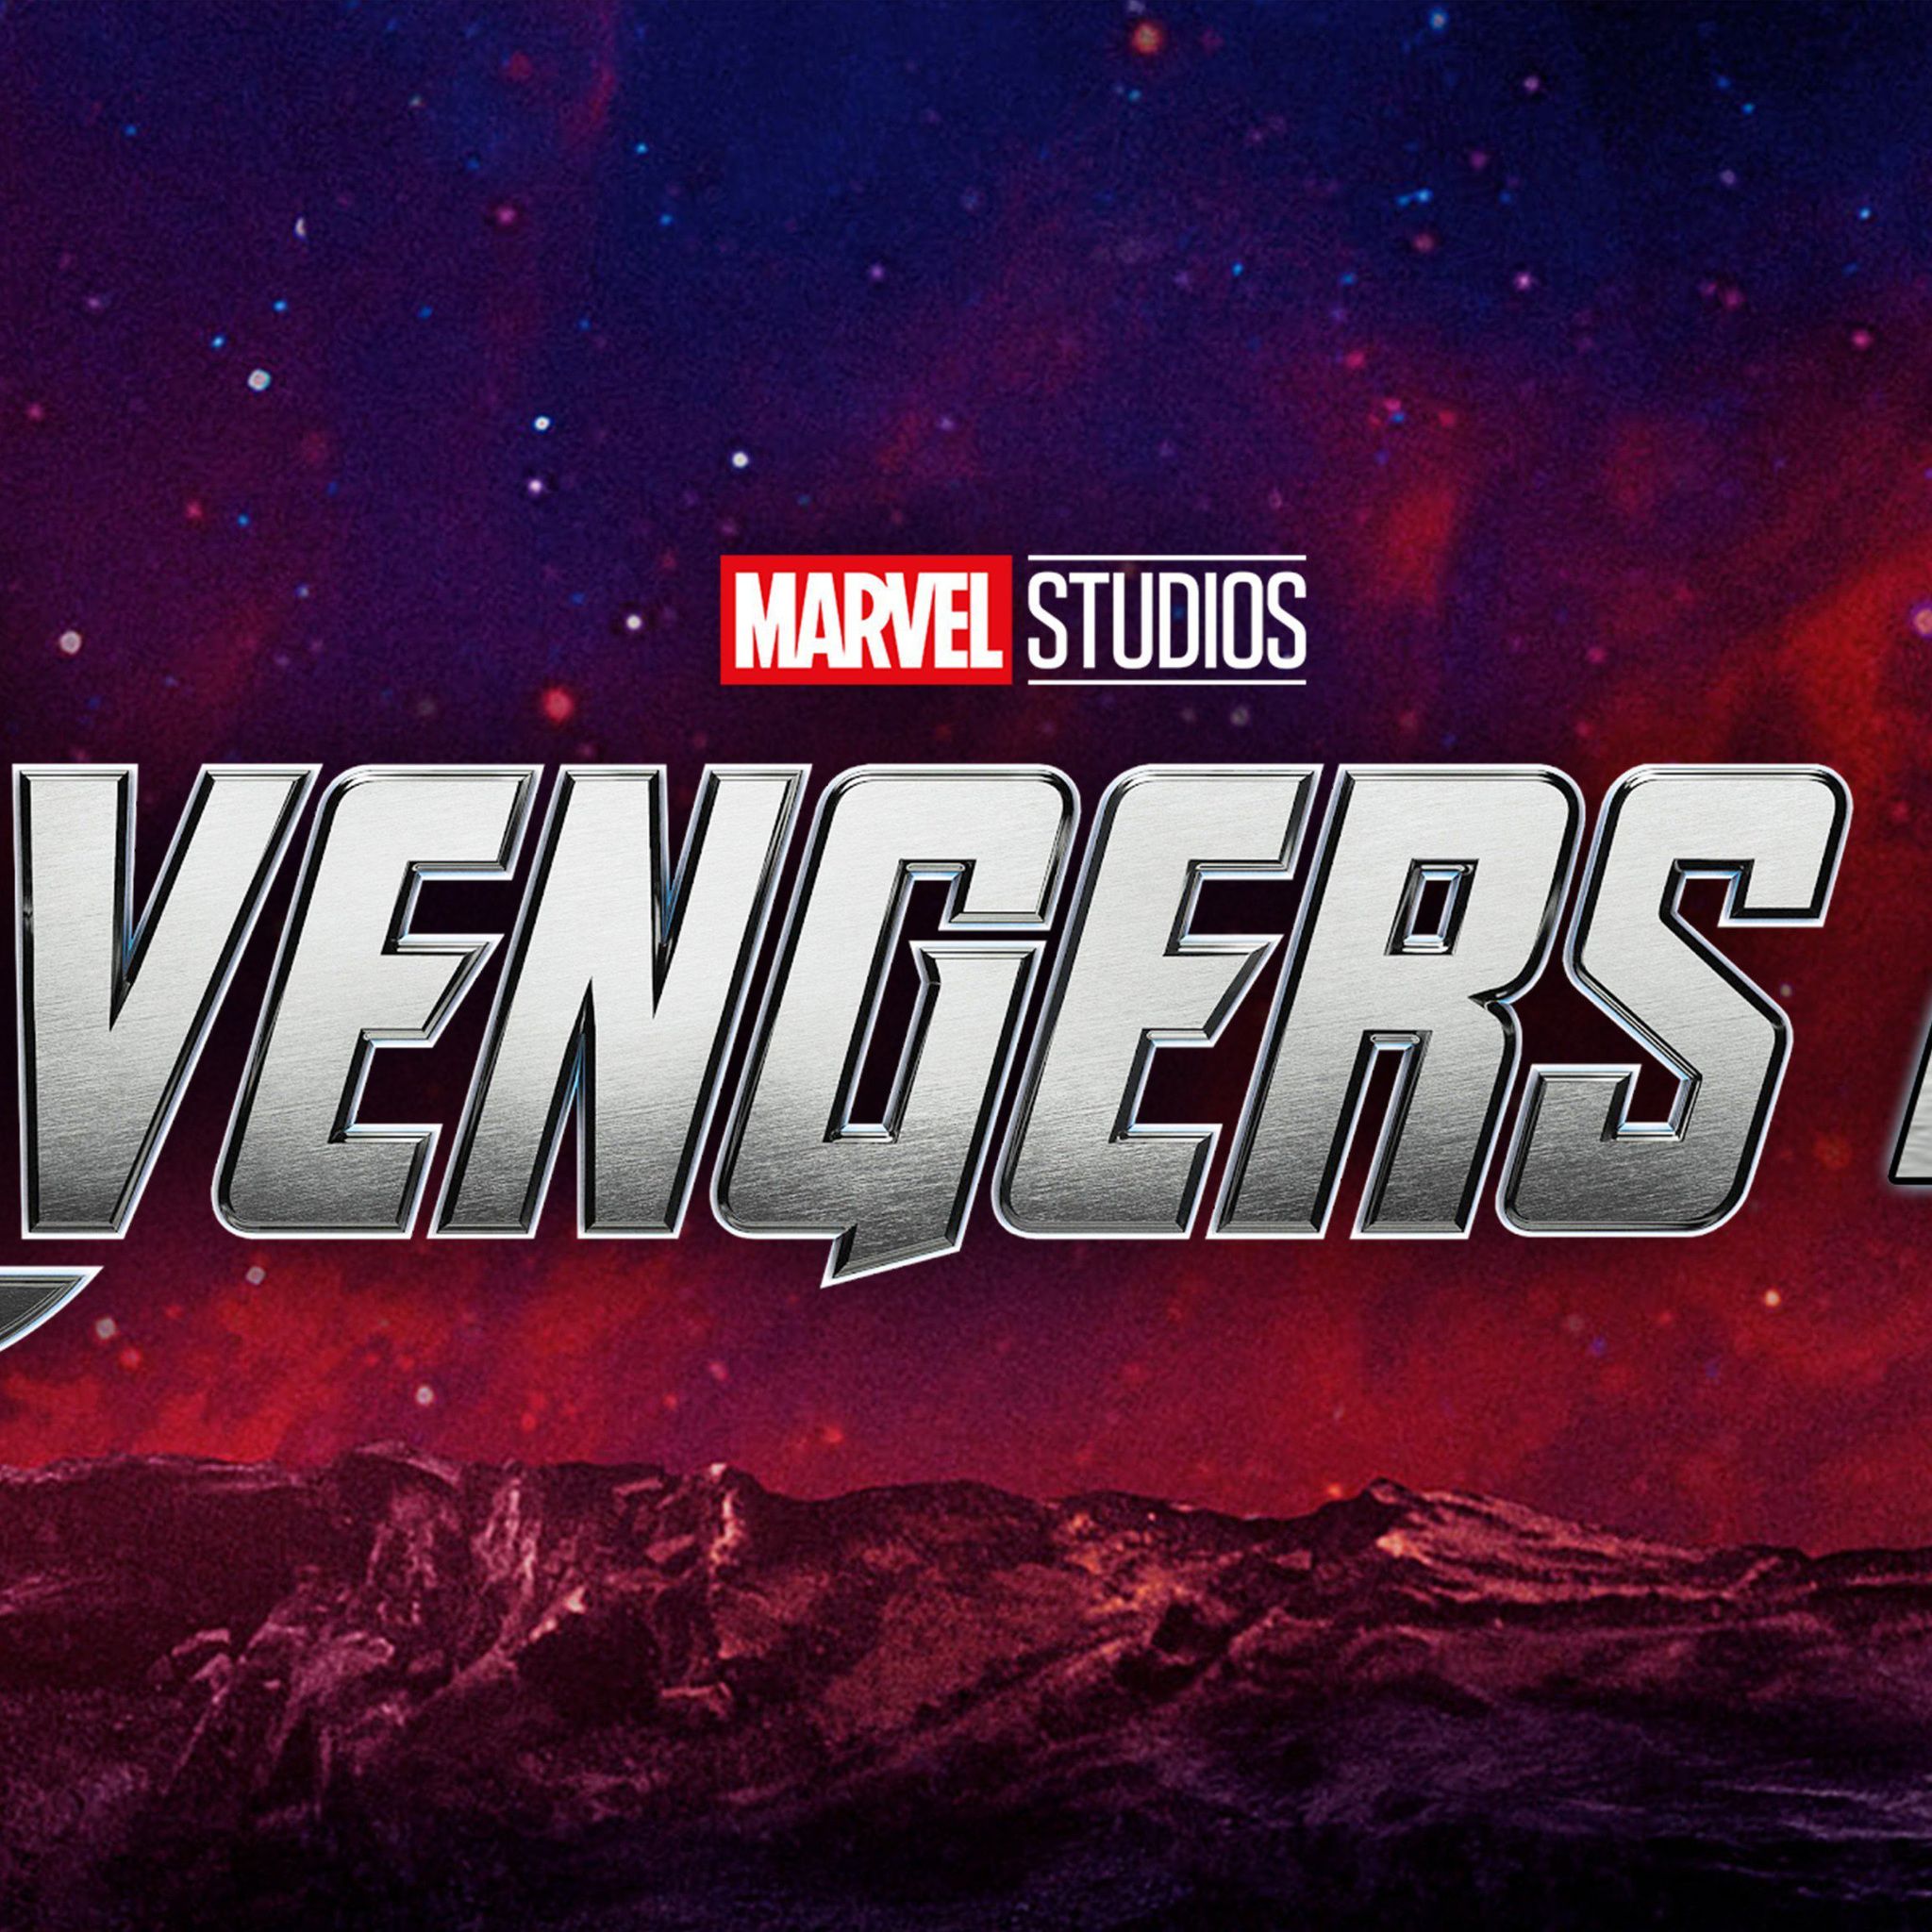 Marvel Avengers 4 iPad Air HD 4k Wallpaper, Image, Background, Photo and Picture